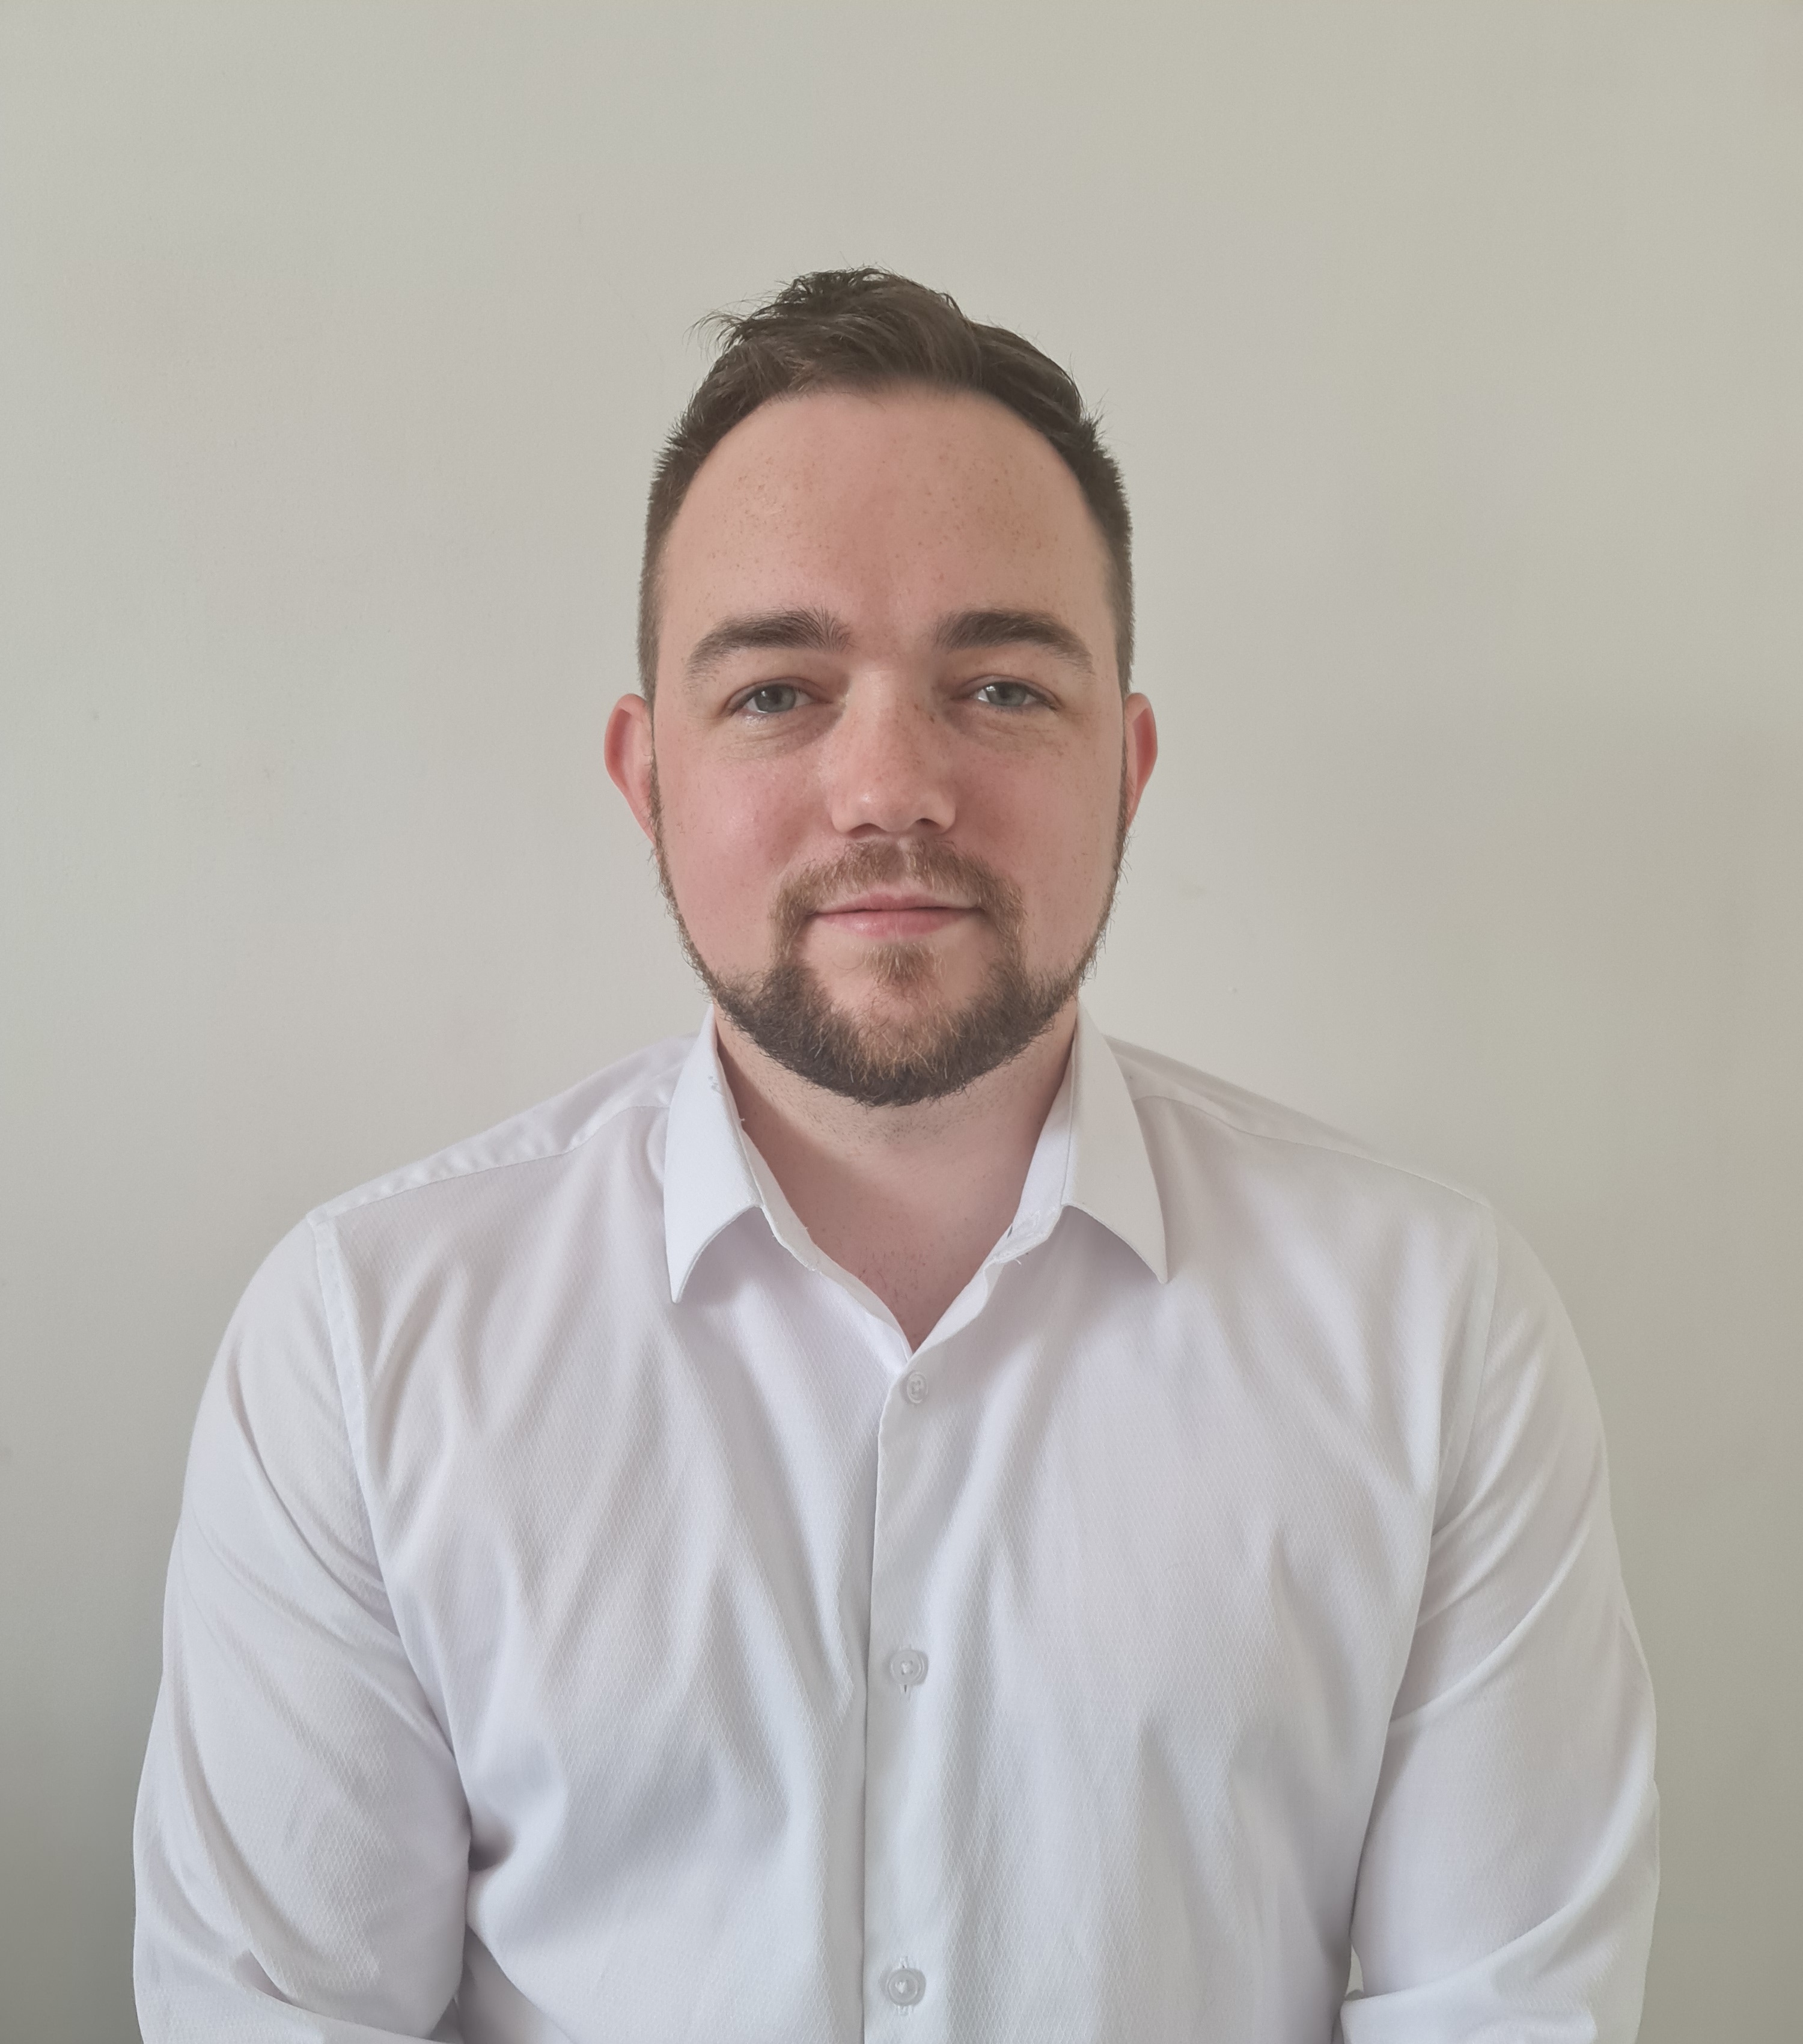 John Kirkpatrick appointed as head of payroll at Chiene + Tait